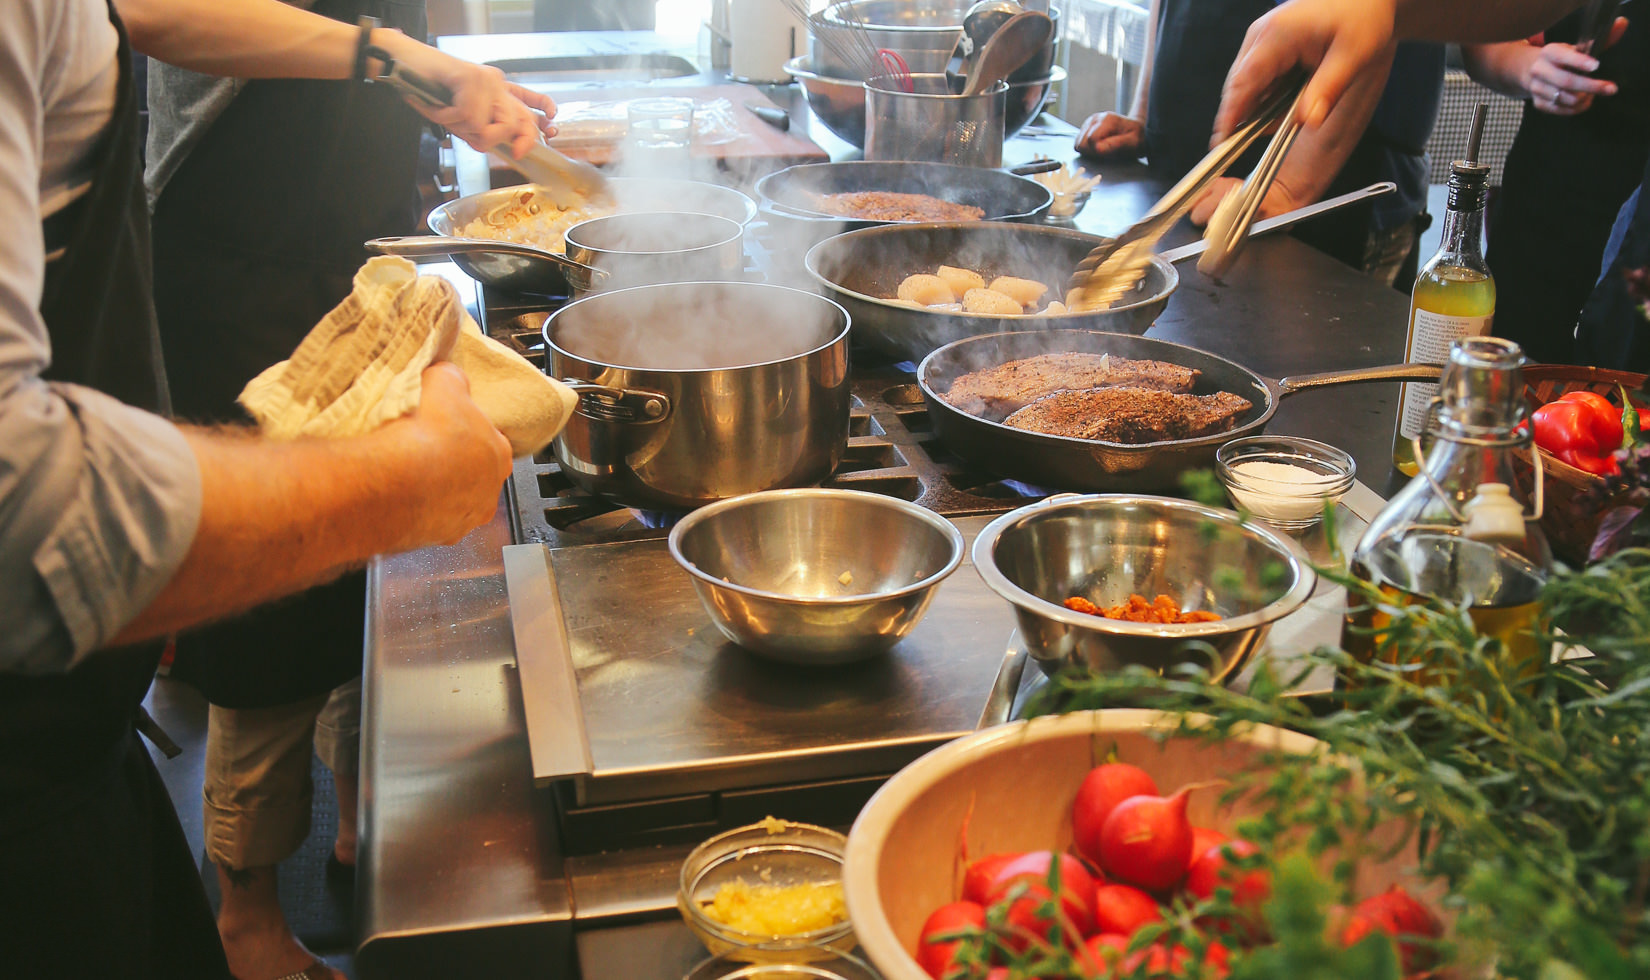 Guests cook at Relish Healdsburg culinary cooking class and winery lunch event in September